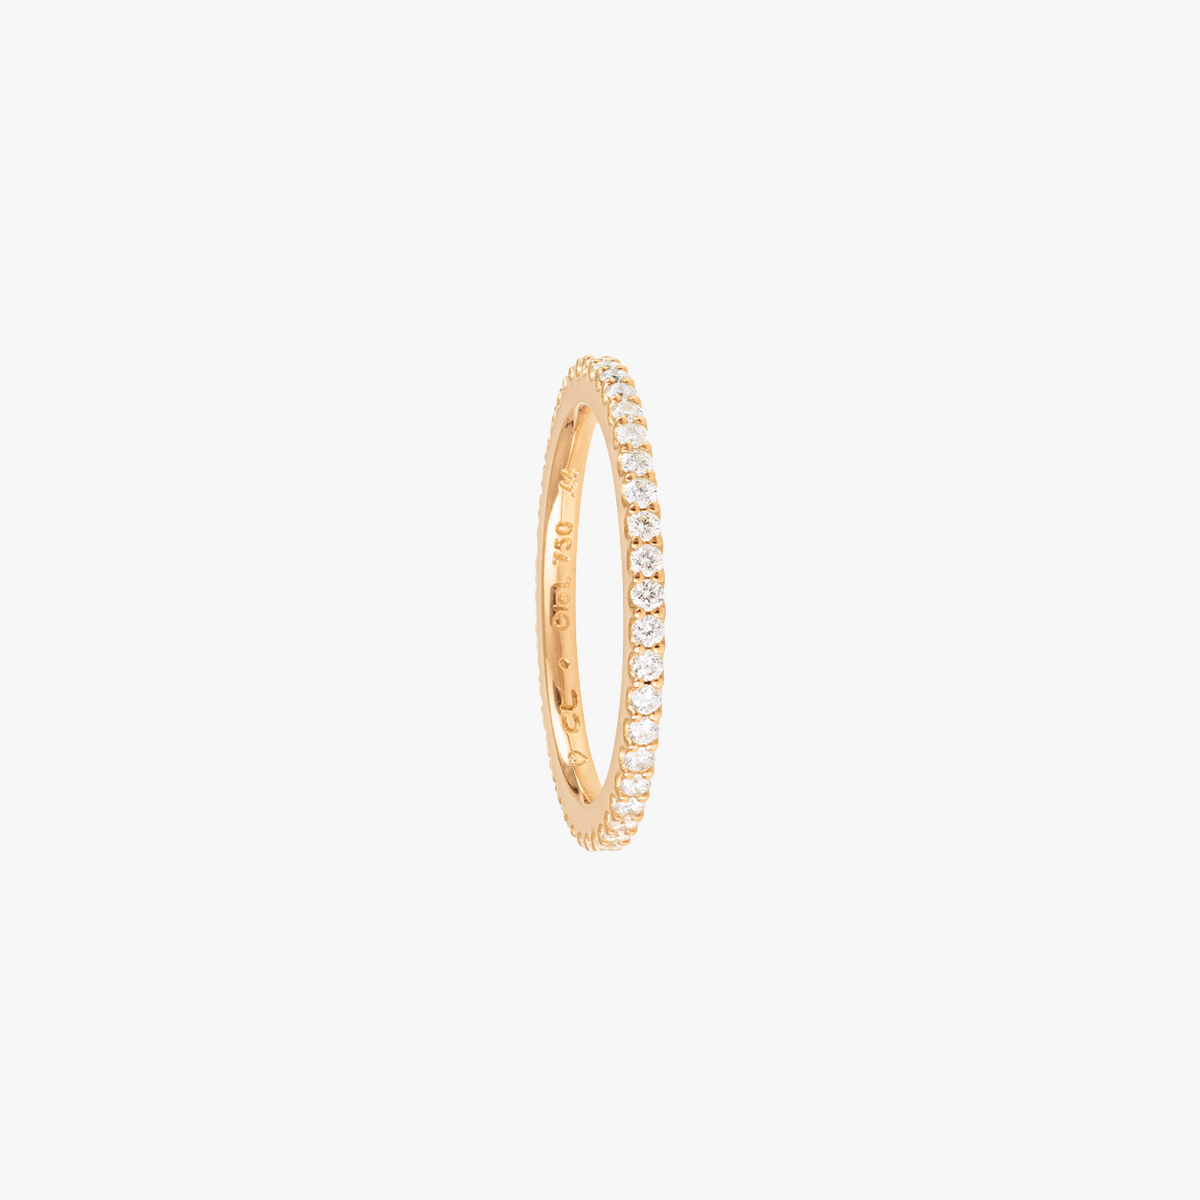 Straight love band in yellow gold with white diamond pavé